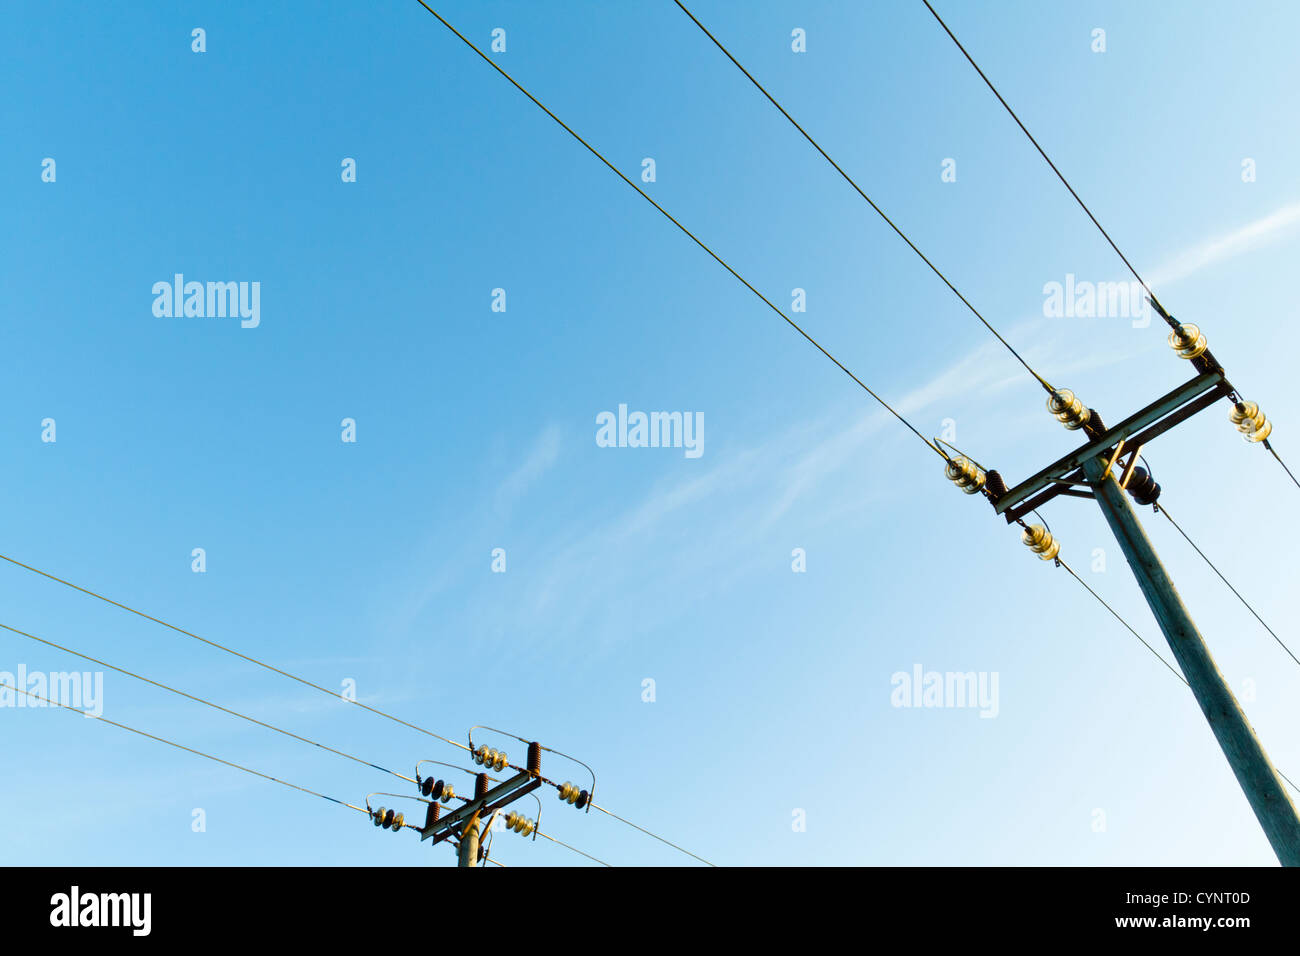 Electricity utility poles with overhead power lines against a blue sky, Nottinghamshire, England, UK Stock Photo